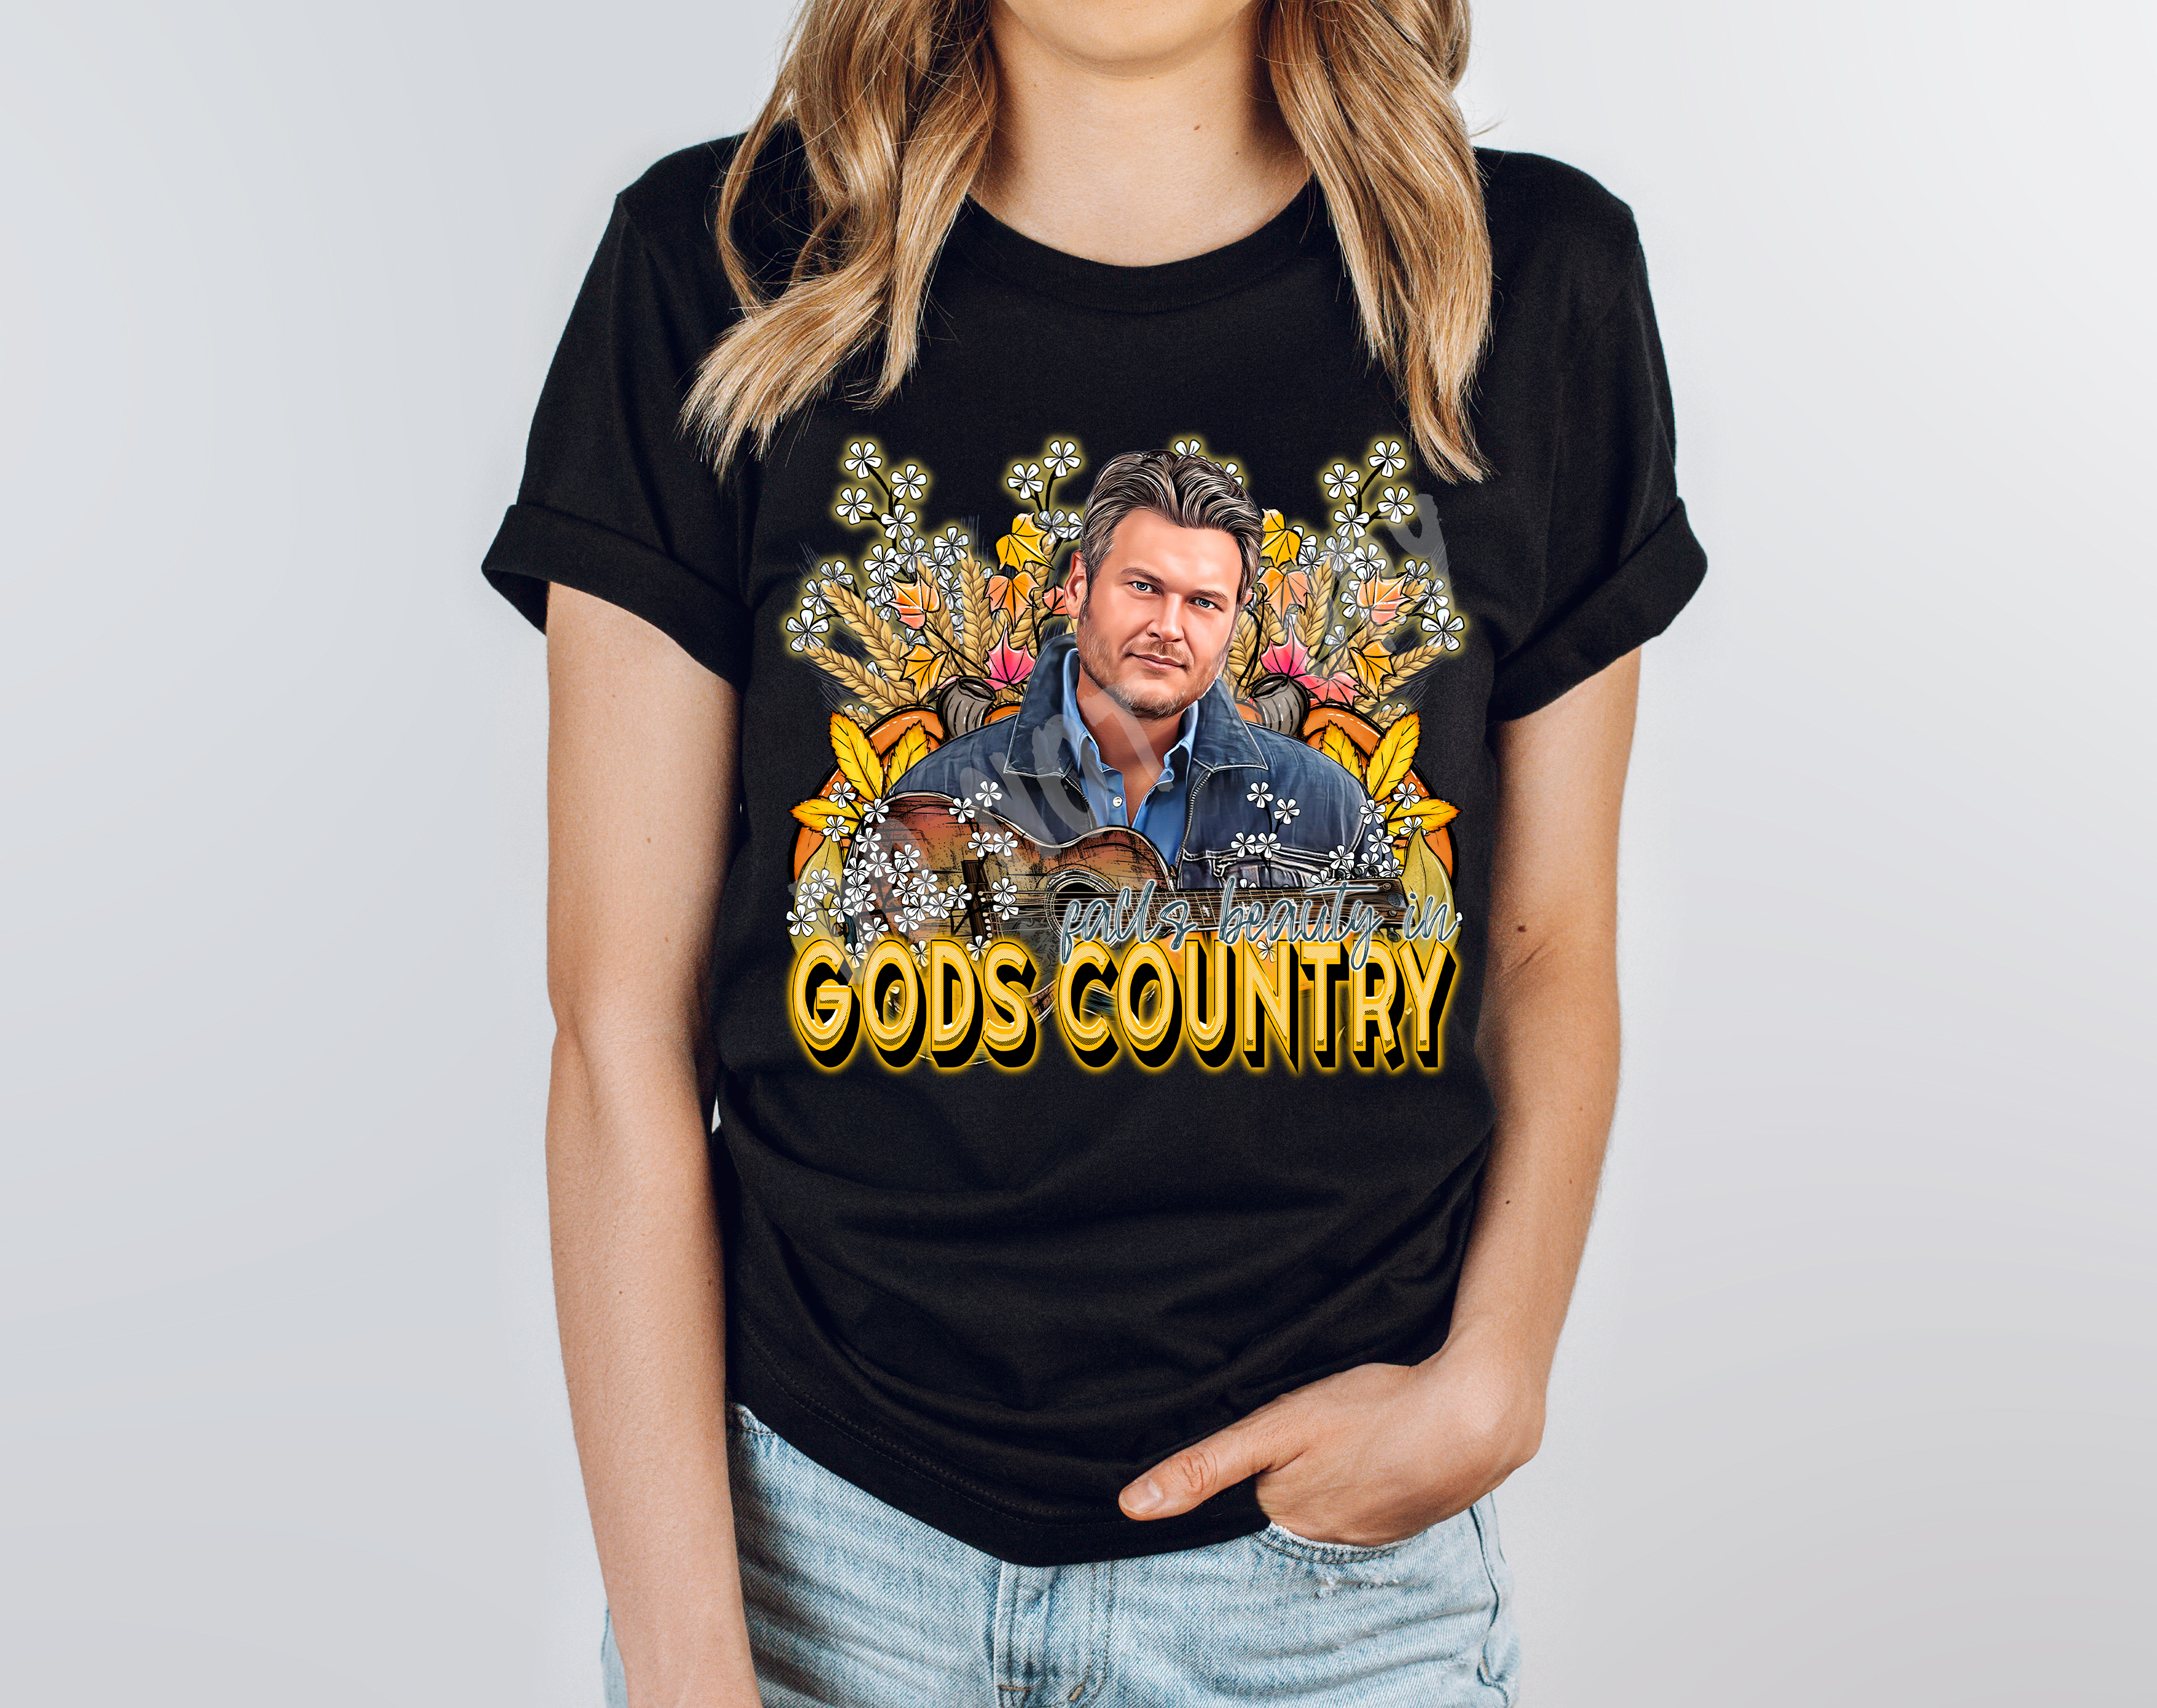 COUNTRY FALL RUN- FALL GODS COUNTRY-UNISEX TEE ADULTS/KIDS PREORDER CLOSING 8/4 ETA END OF SEPT